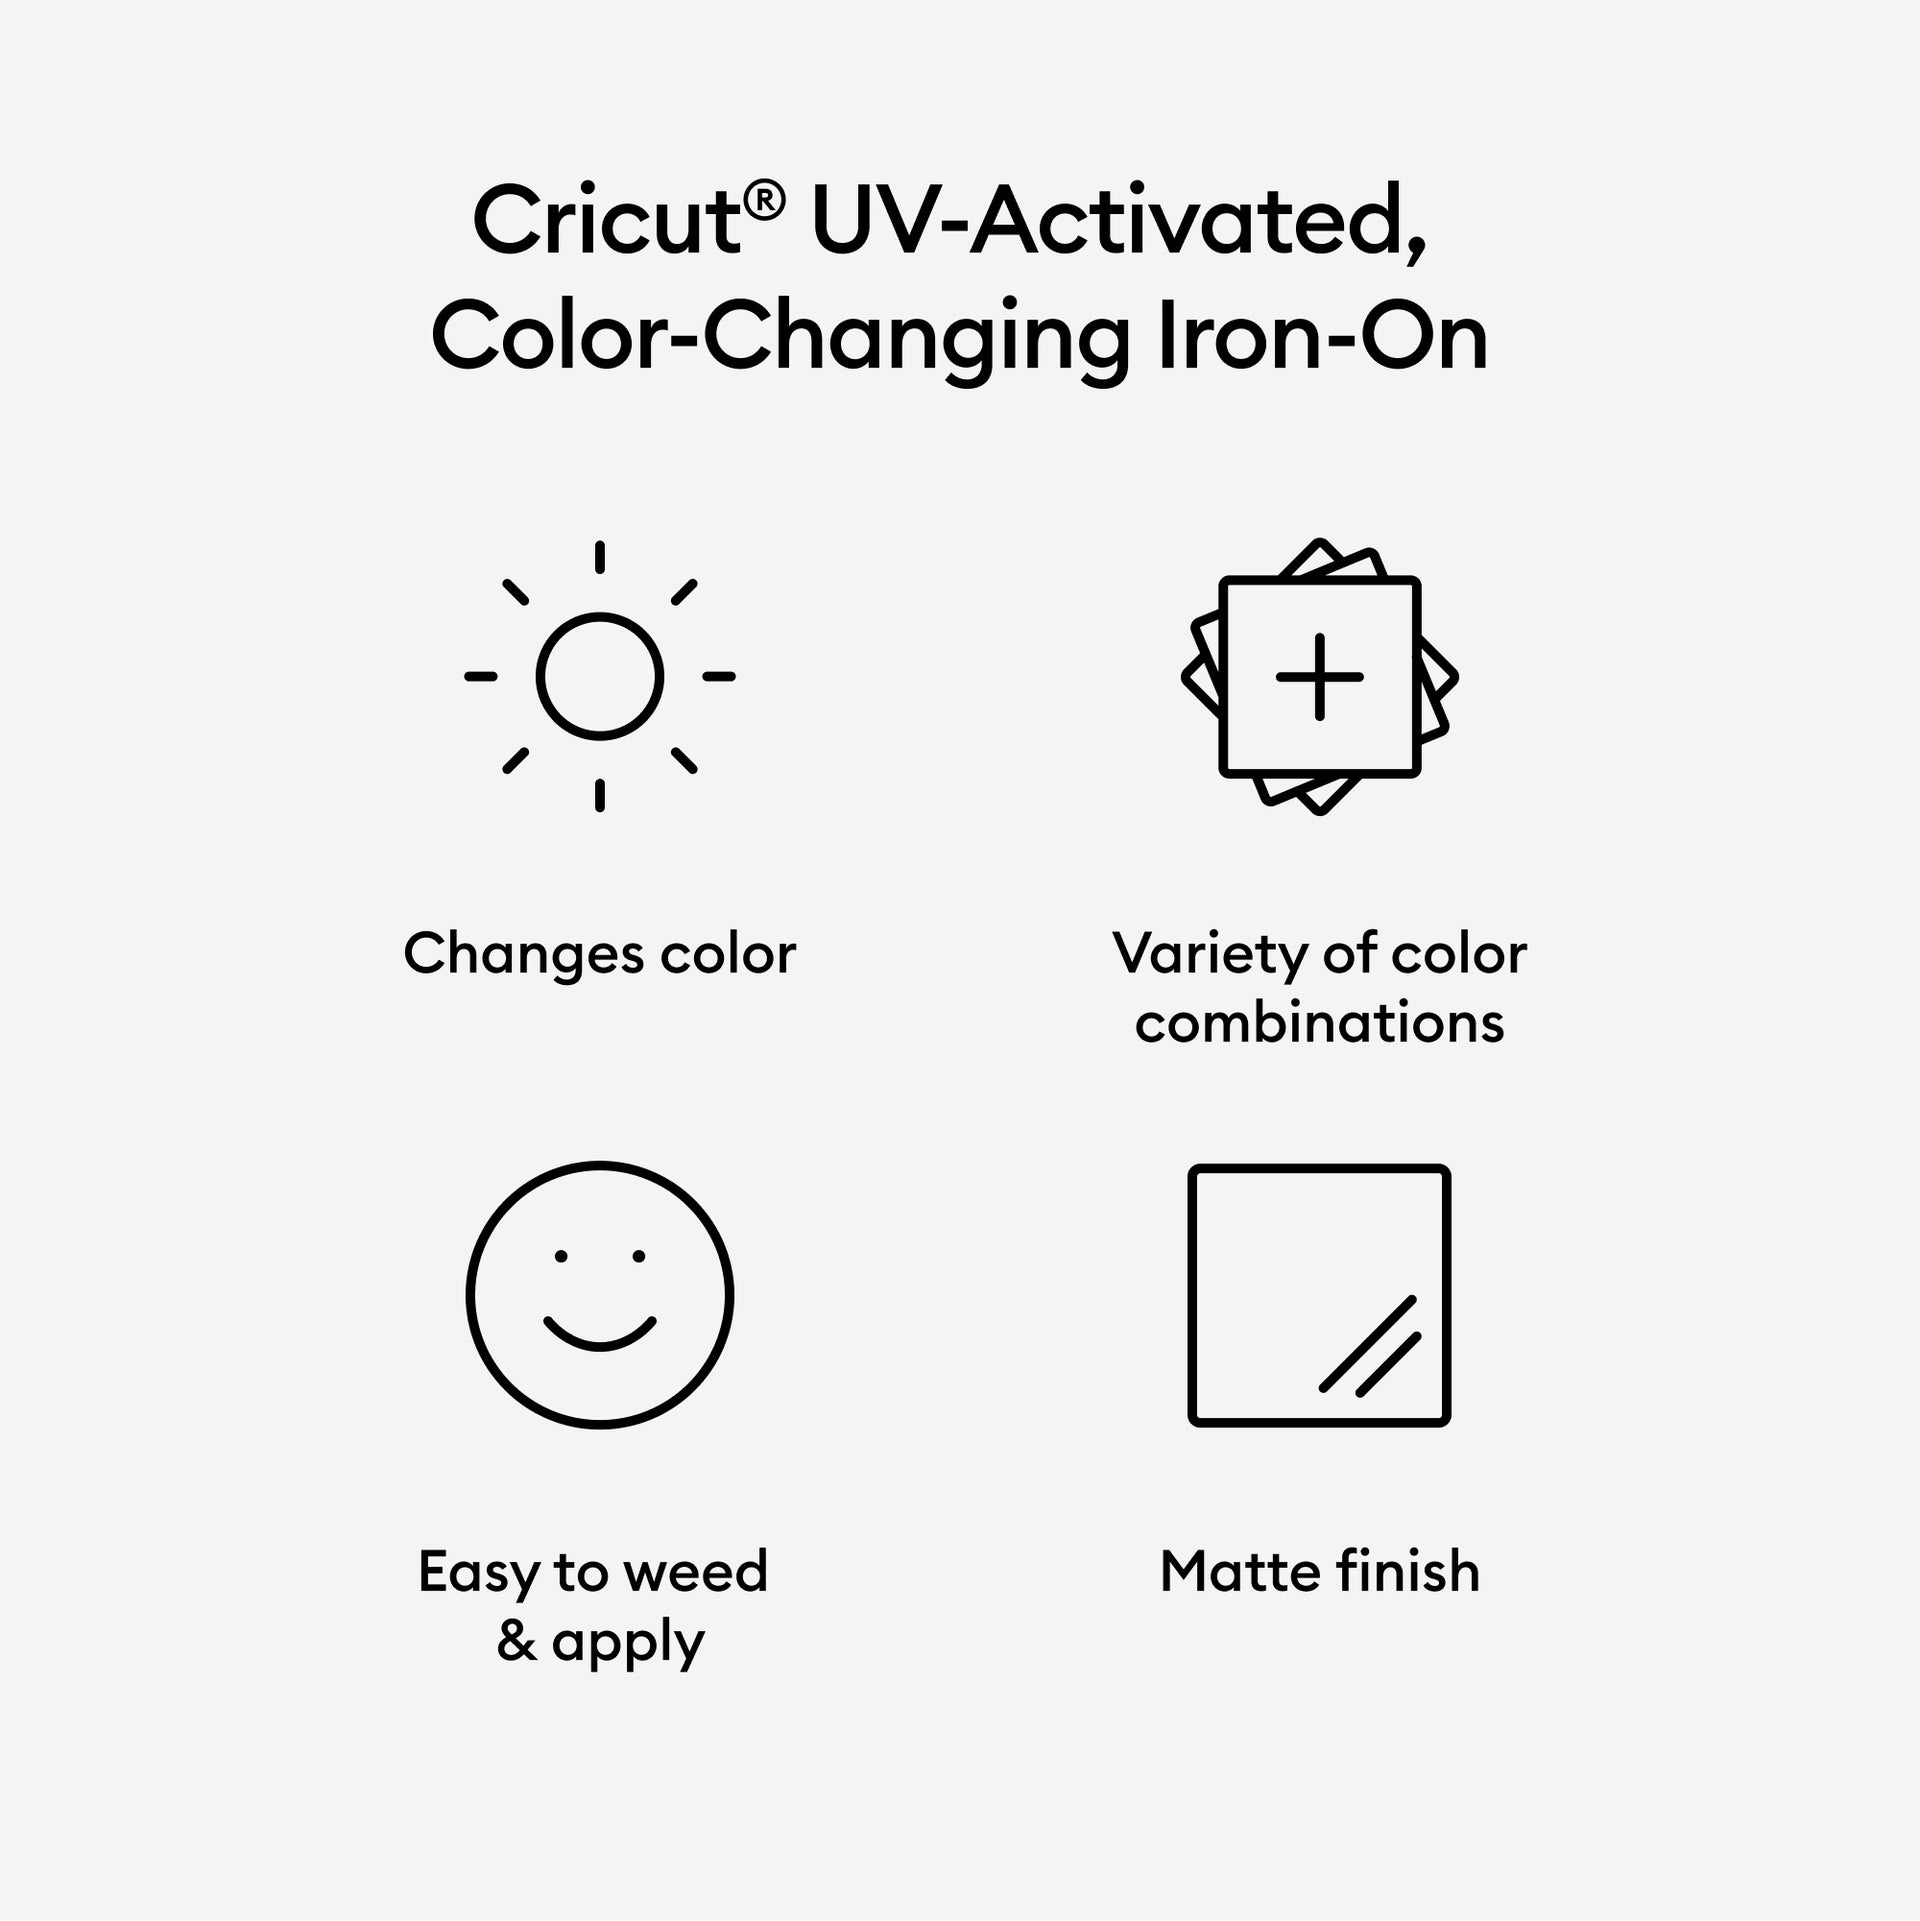 Cricut UV-Activated, Color-Changing Iron-On White - Violet